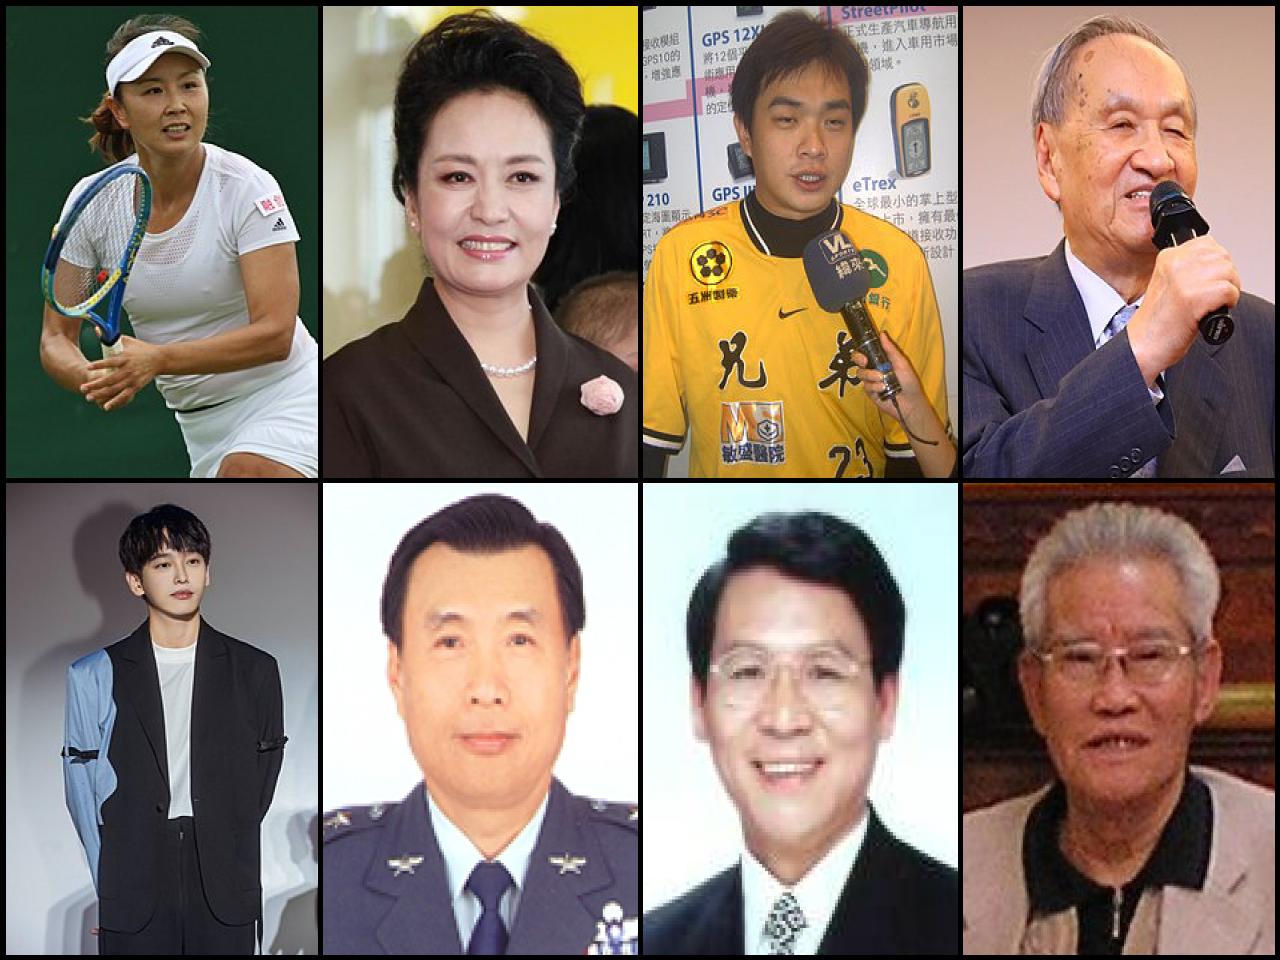 List of Famous people named <b>Peng</b>